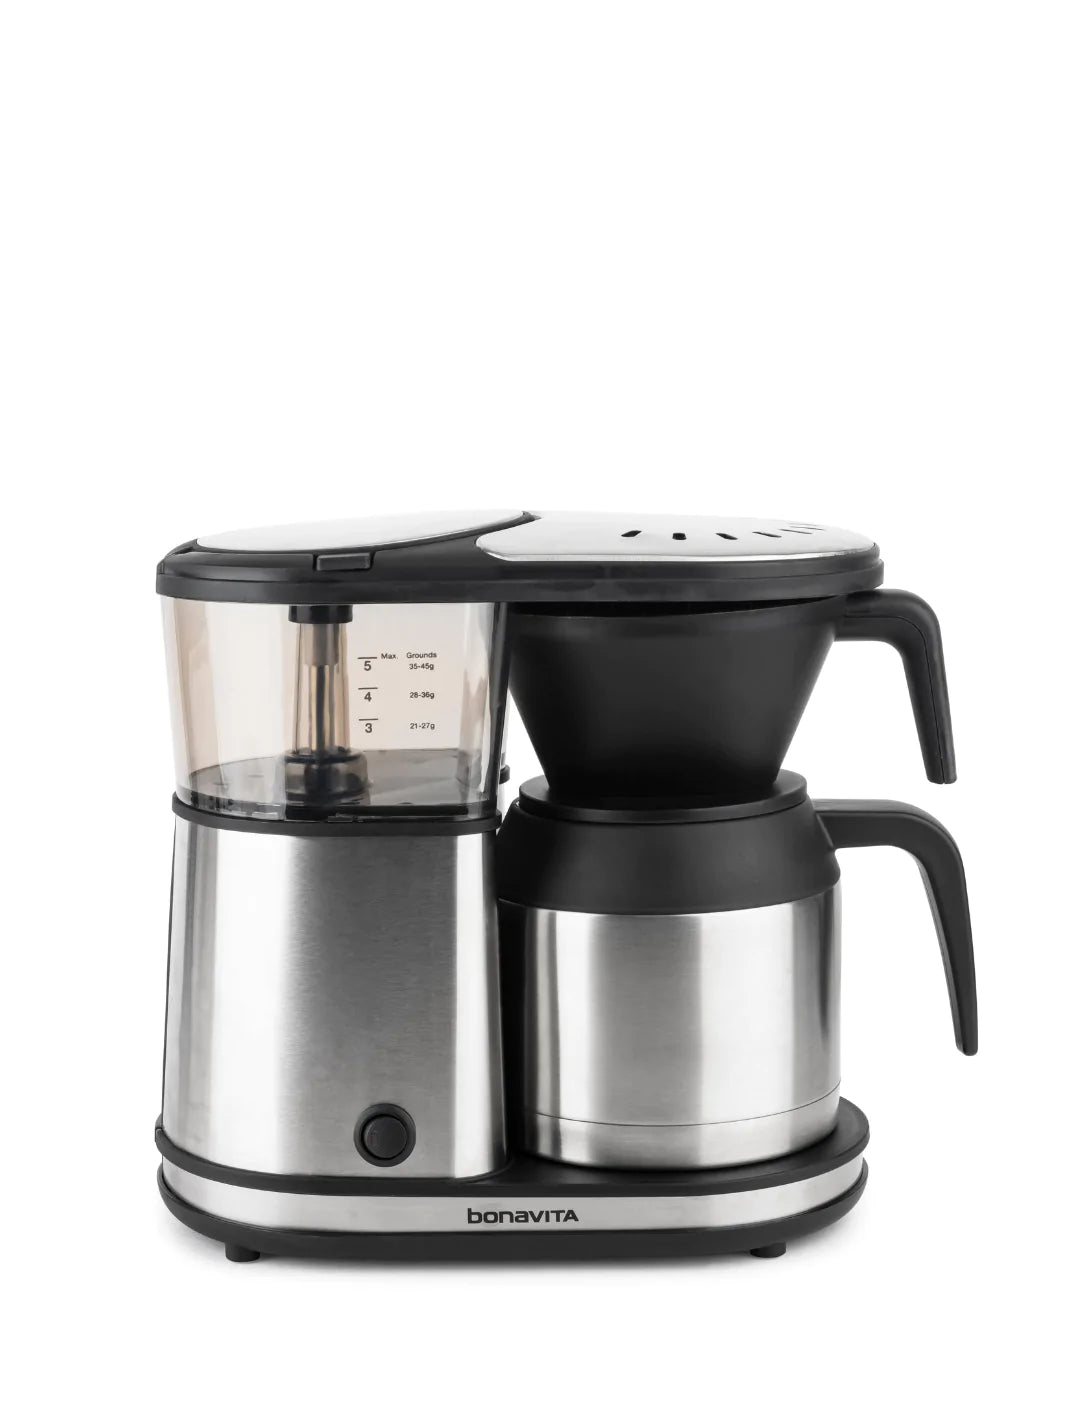 BONAVITA One-Touch Thermal Carafe Coffee Brewer (5-Cup) - Image 1